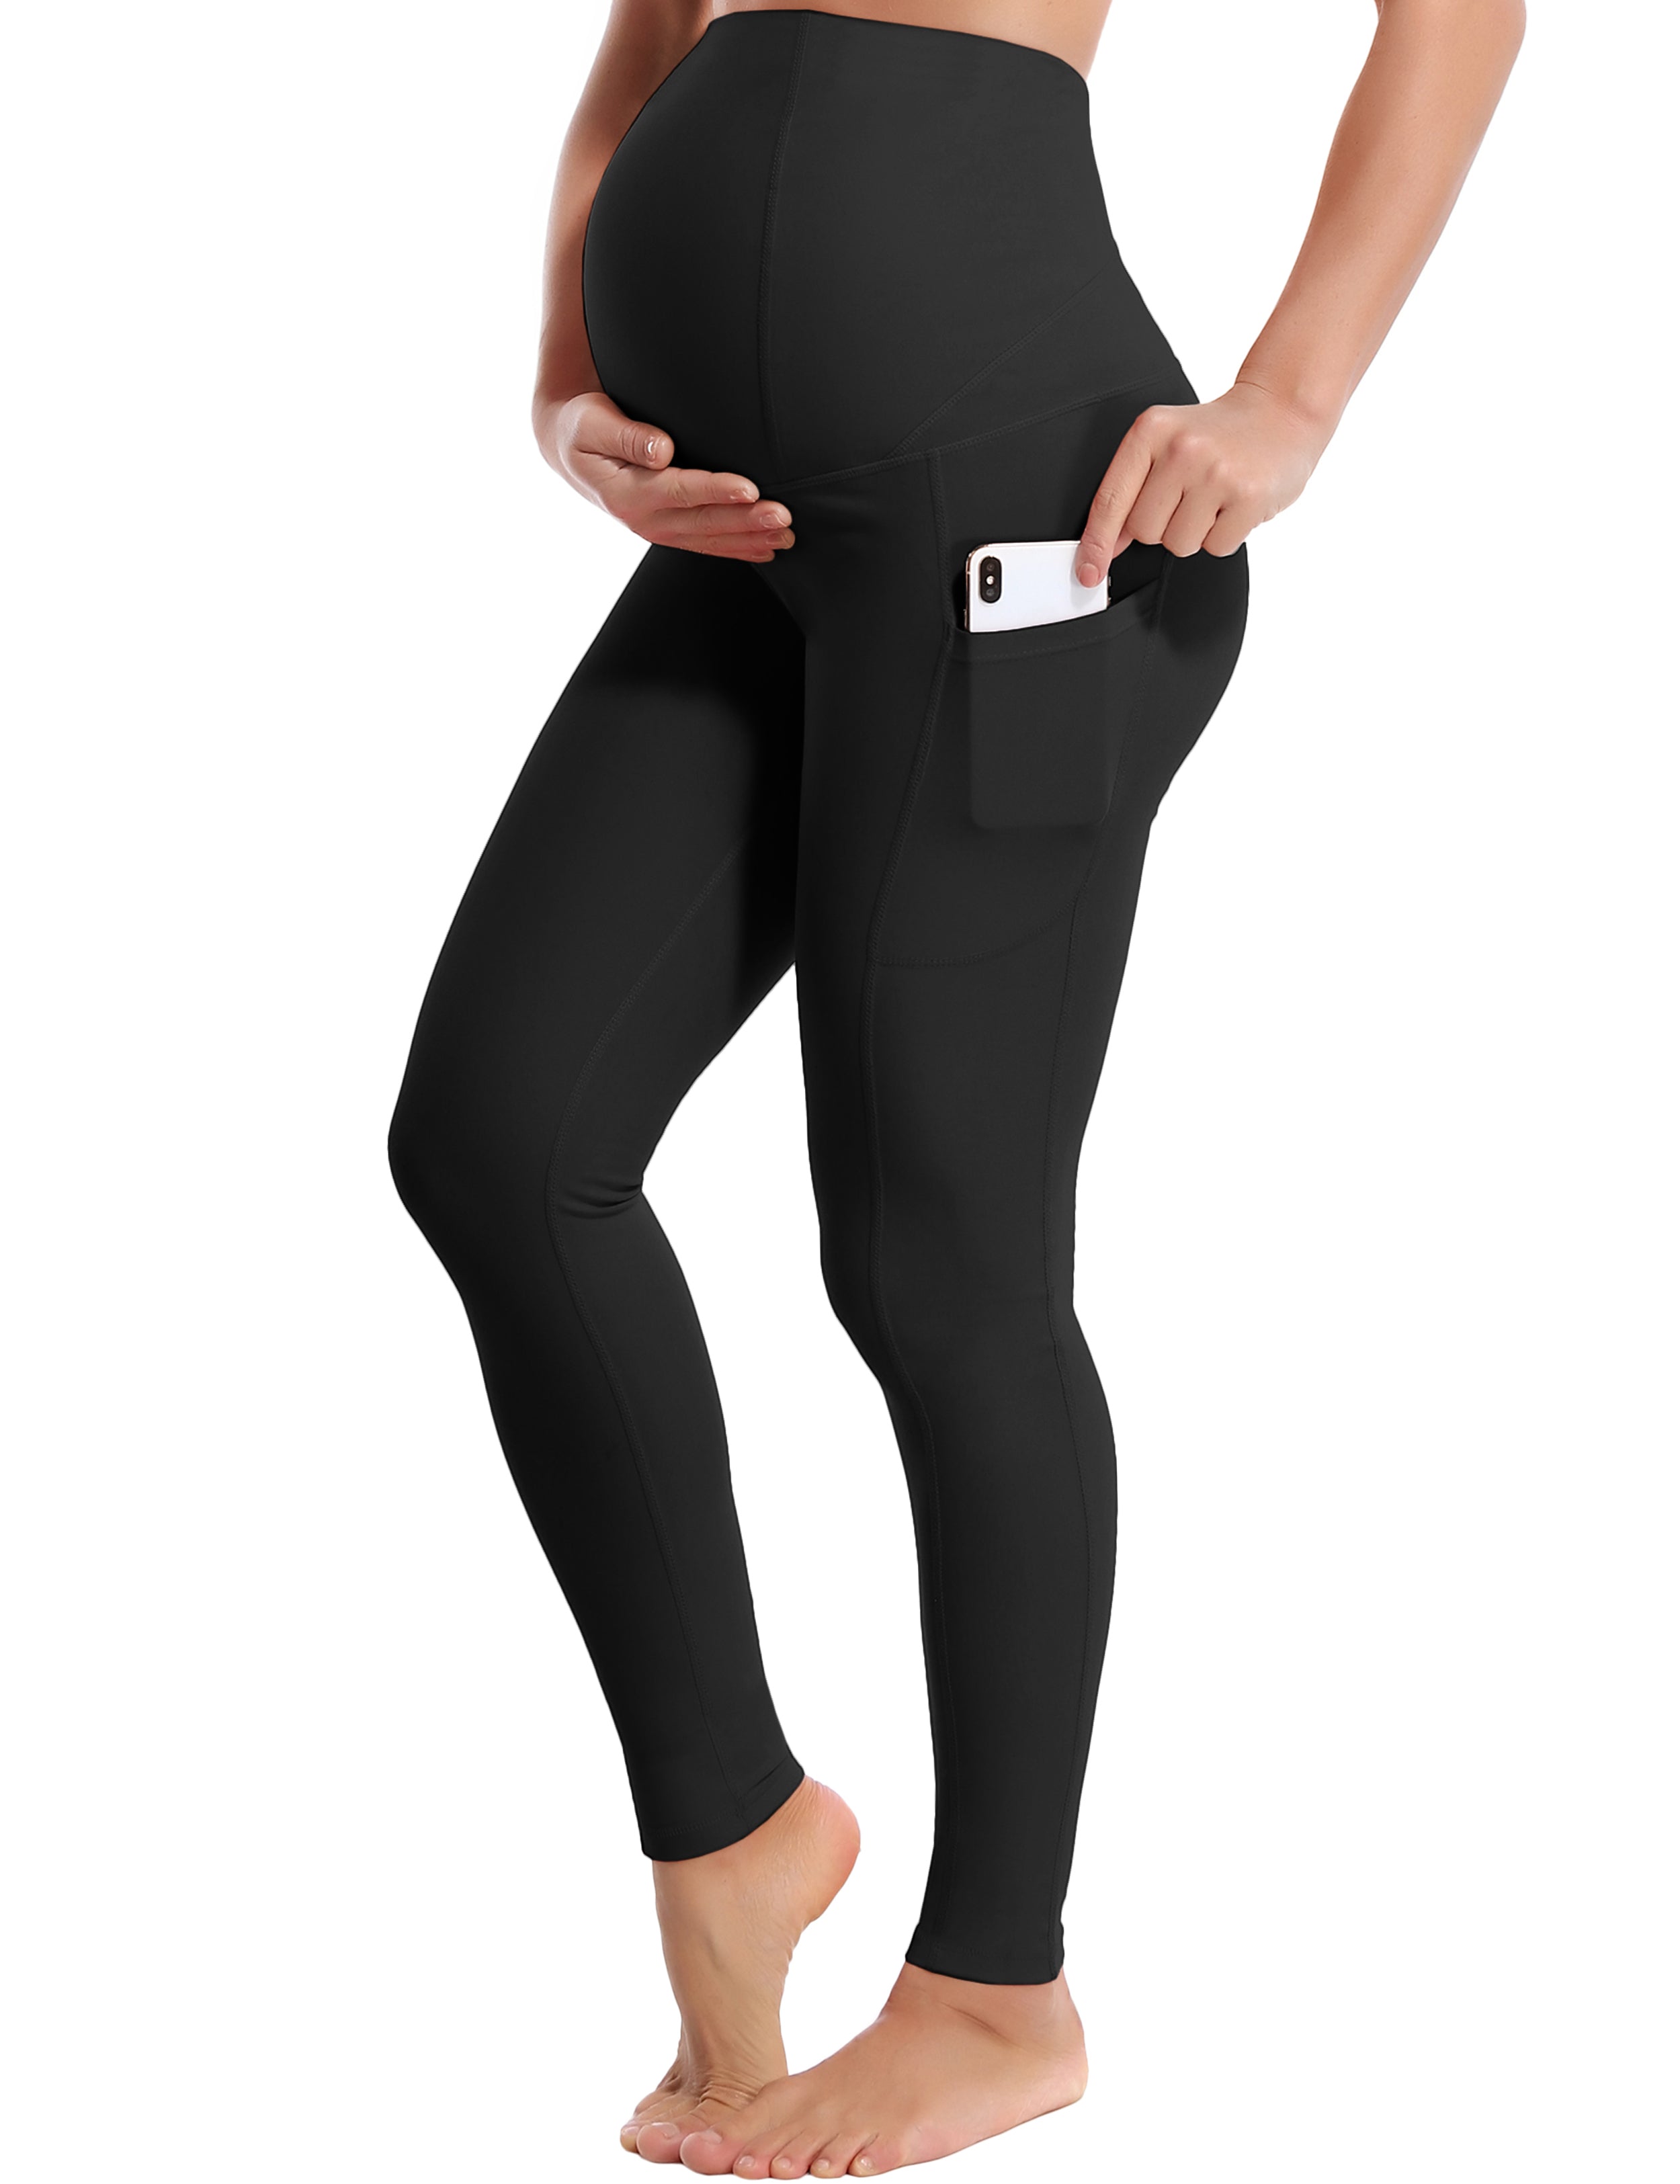 26" Side Pockets Maternity Golf Pants black 87%Nylon/13%Spandex Softest-ever fabric High elasticity 4-way stretch Fabric doesn't attract lint easily No see-through Moisture-wicking Machine wash